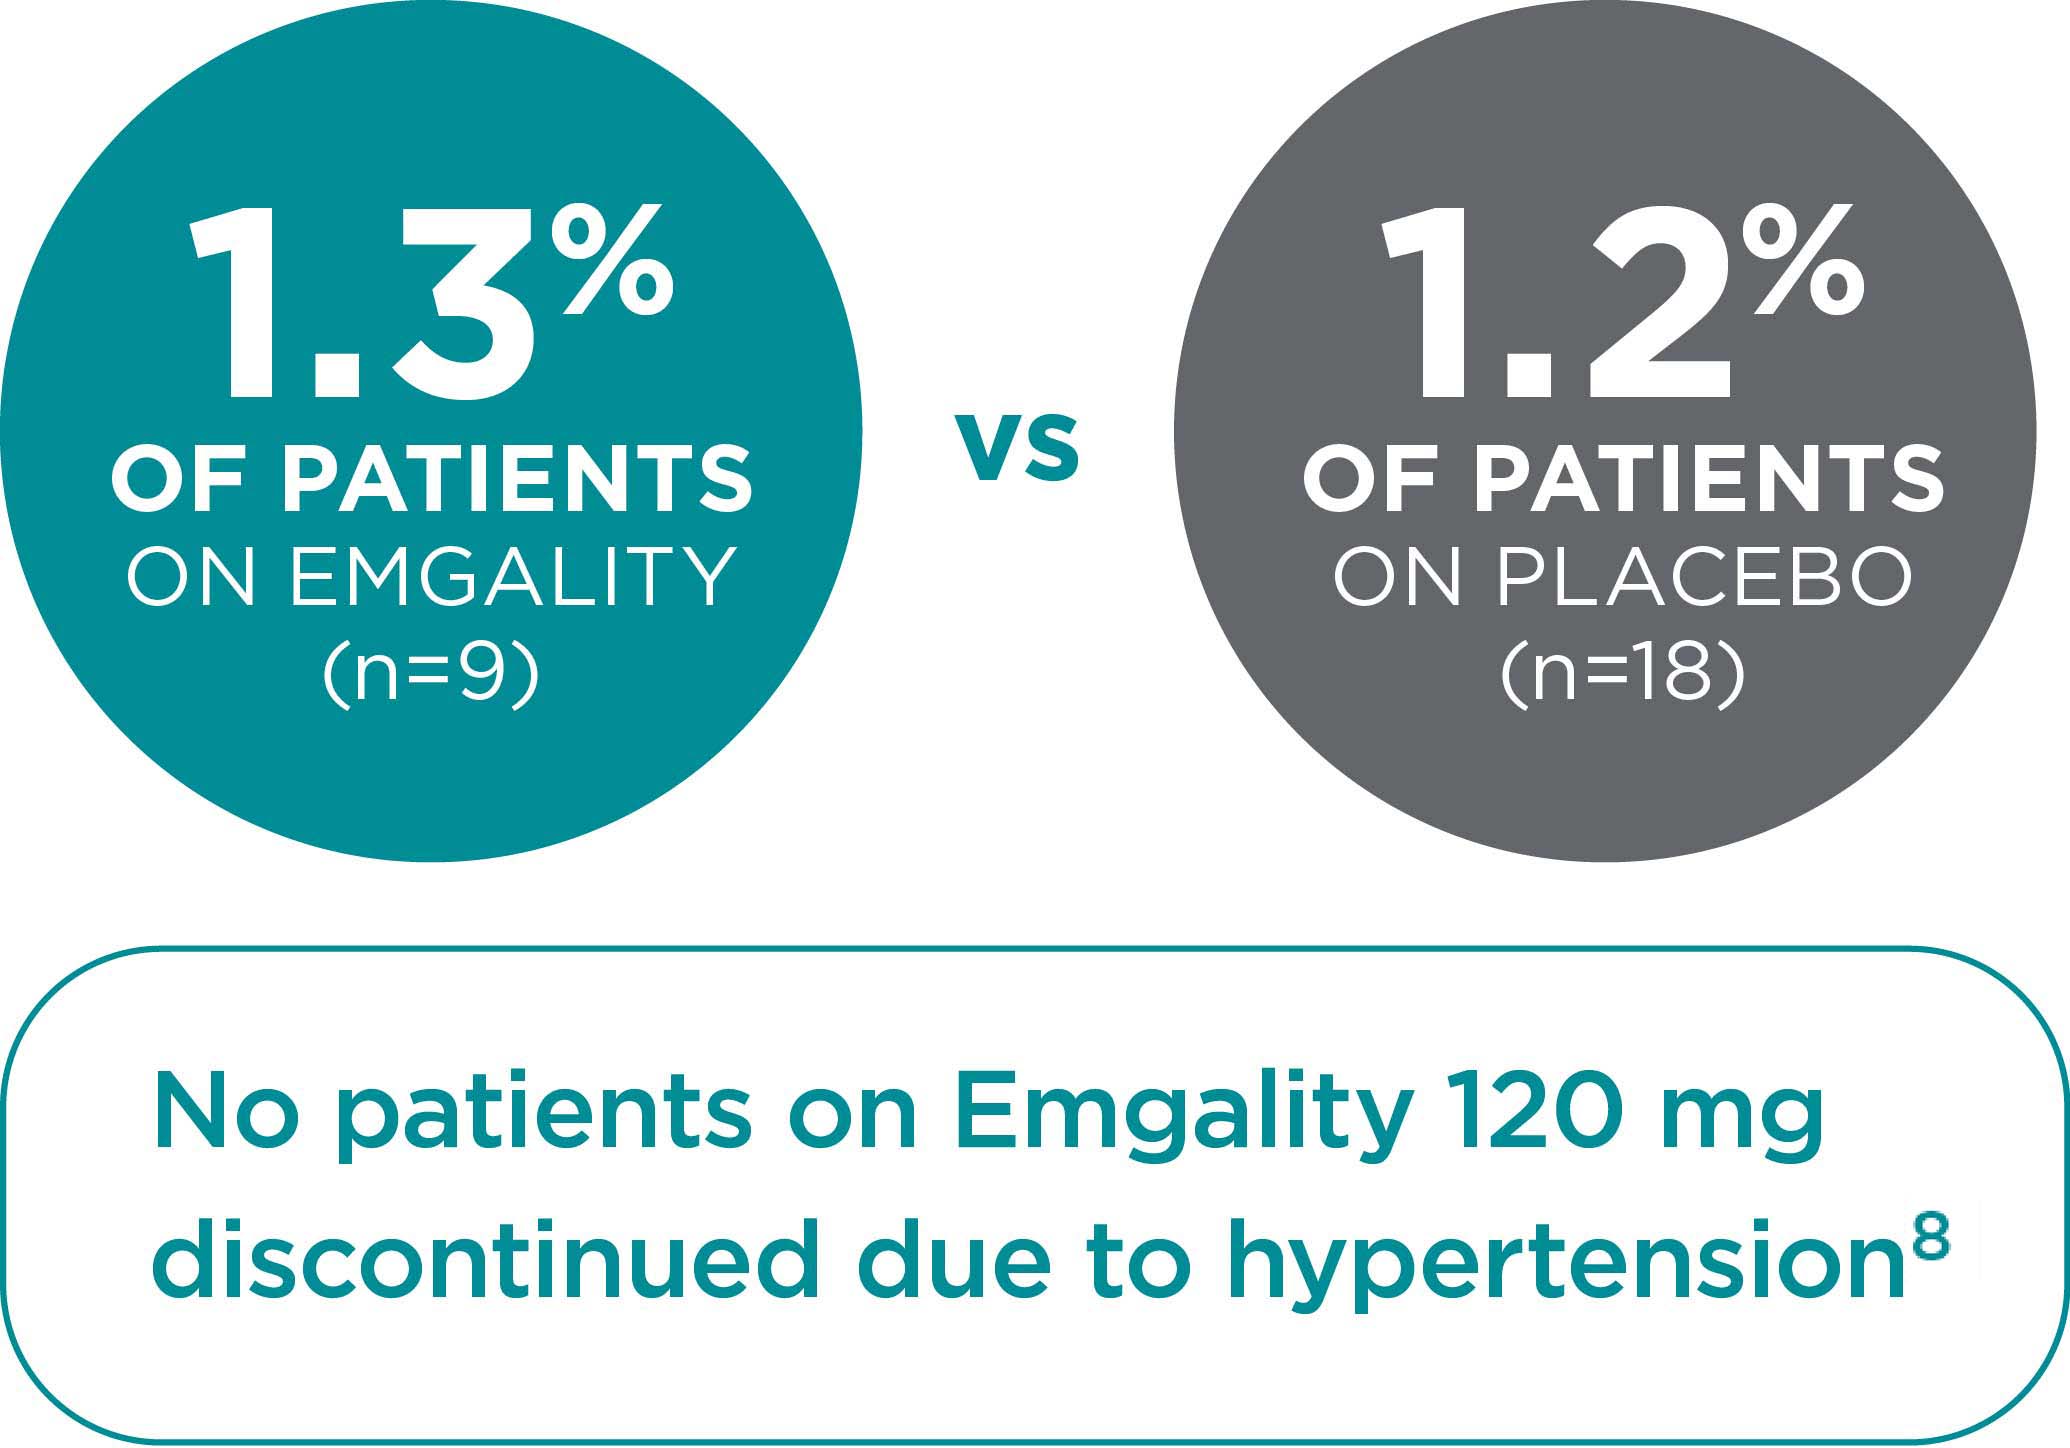 1.3% of patients on Emgality (n=9) vs 1.2% of patients on placebo (n=18)